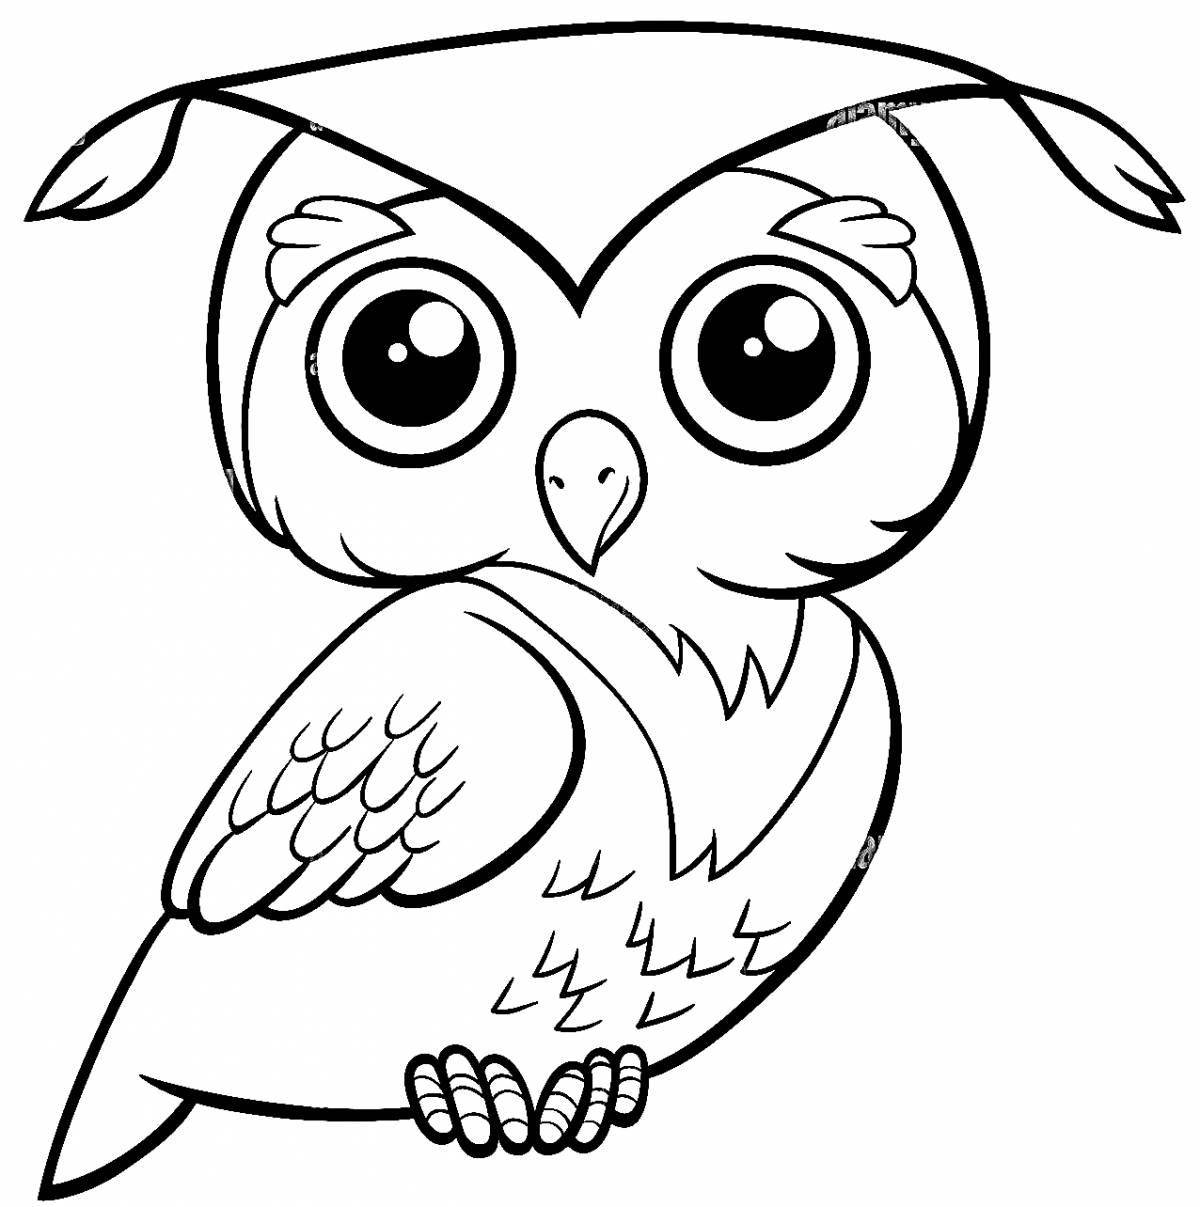 Colorful wise owl coloring page for kids